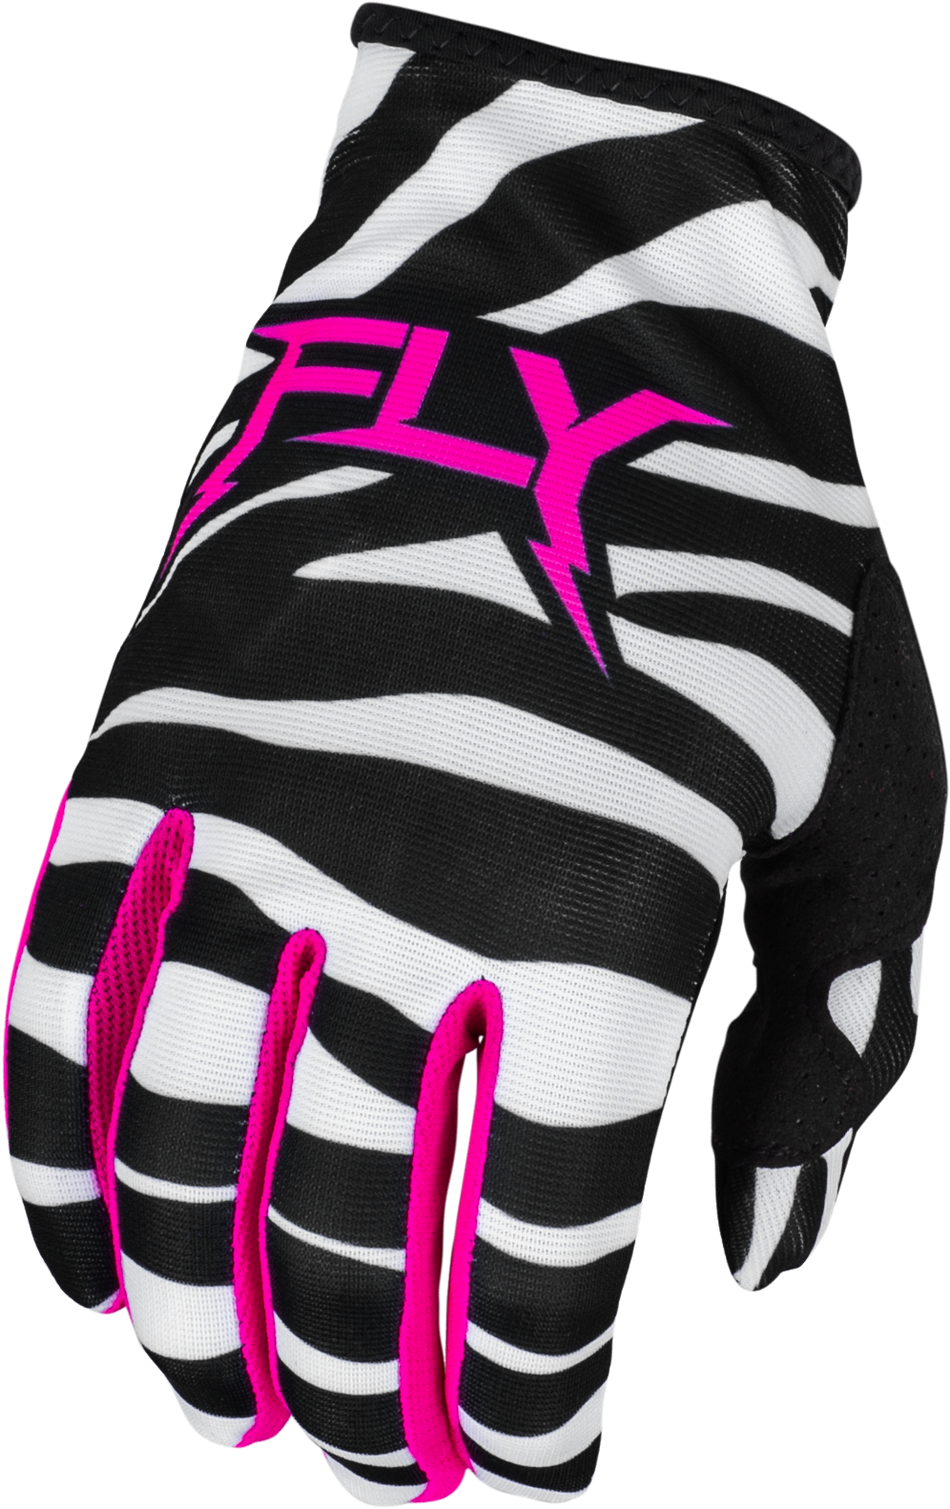 FLY RACING Youth Lite Uncaged Gloves Black/White/Neon Pink Ys 377-741YS